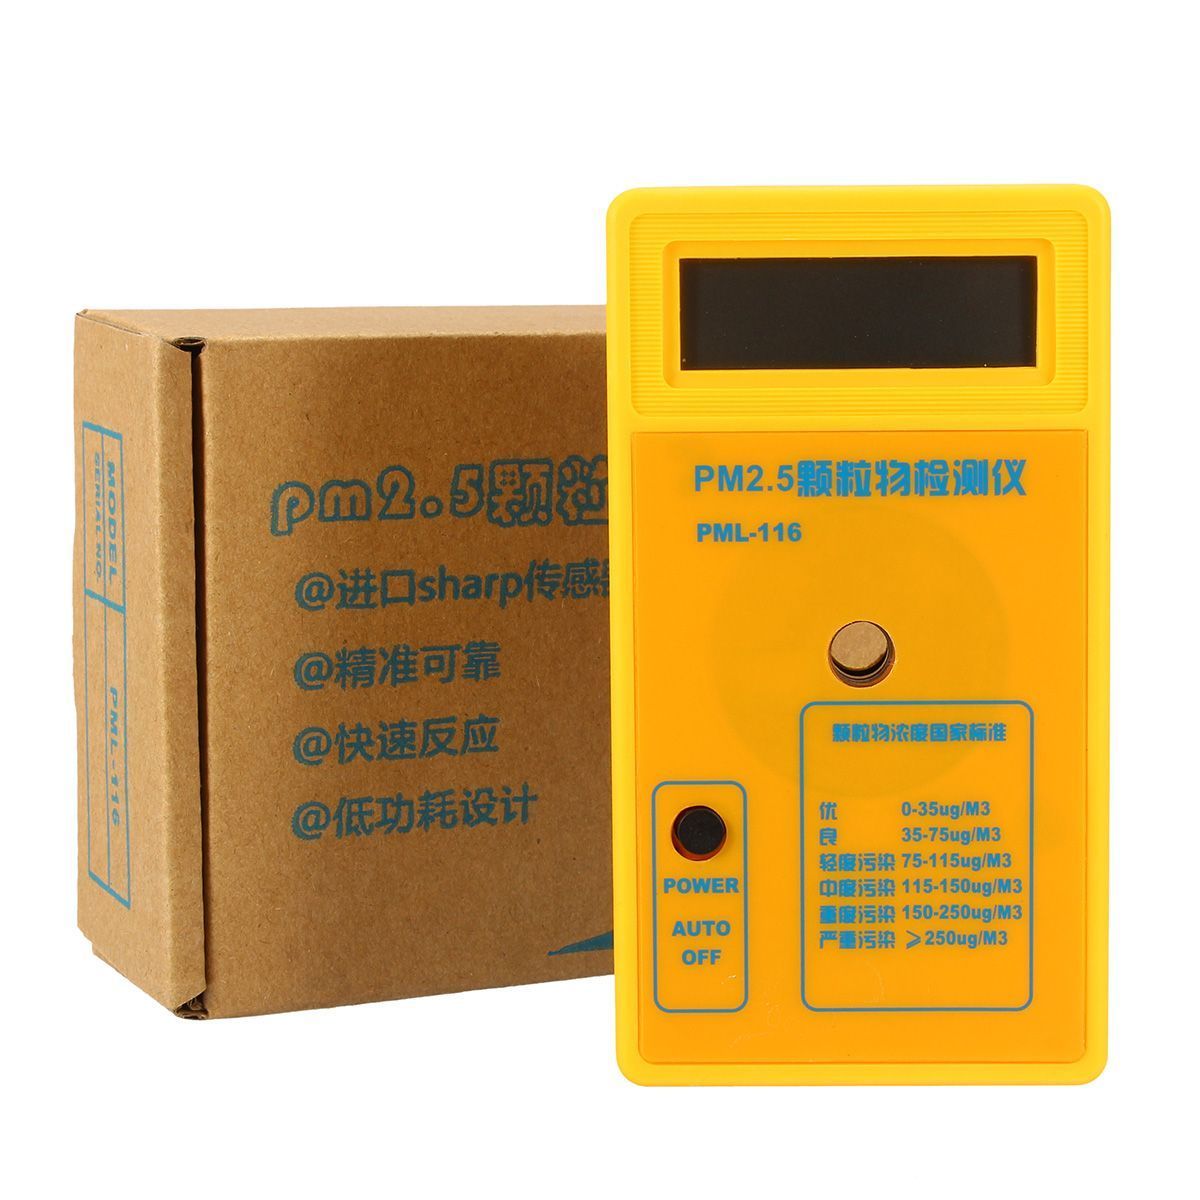 PM25-Particle-Detector-Haze-Dust-AirQuality-Monitoring-Analyzer-Meter-Sensor-1257865